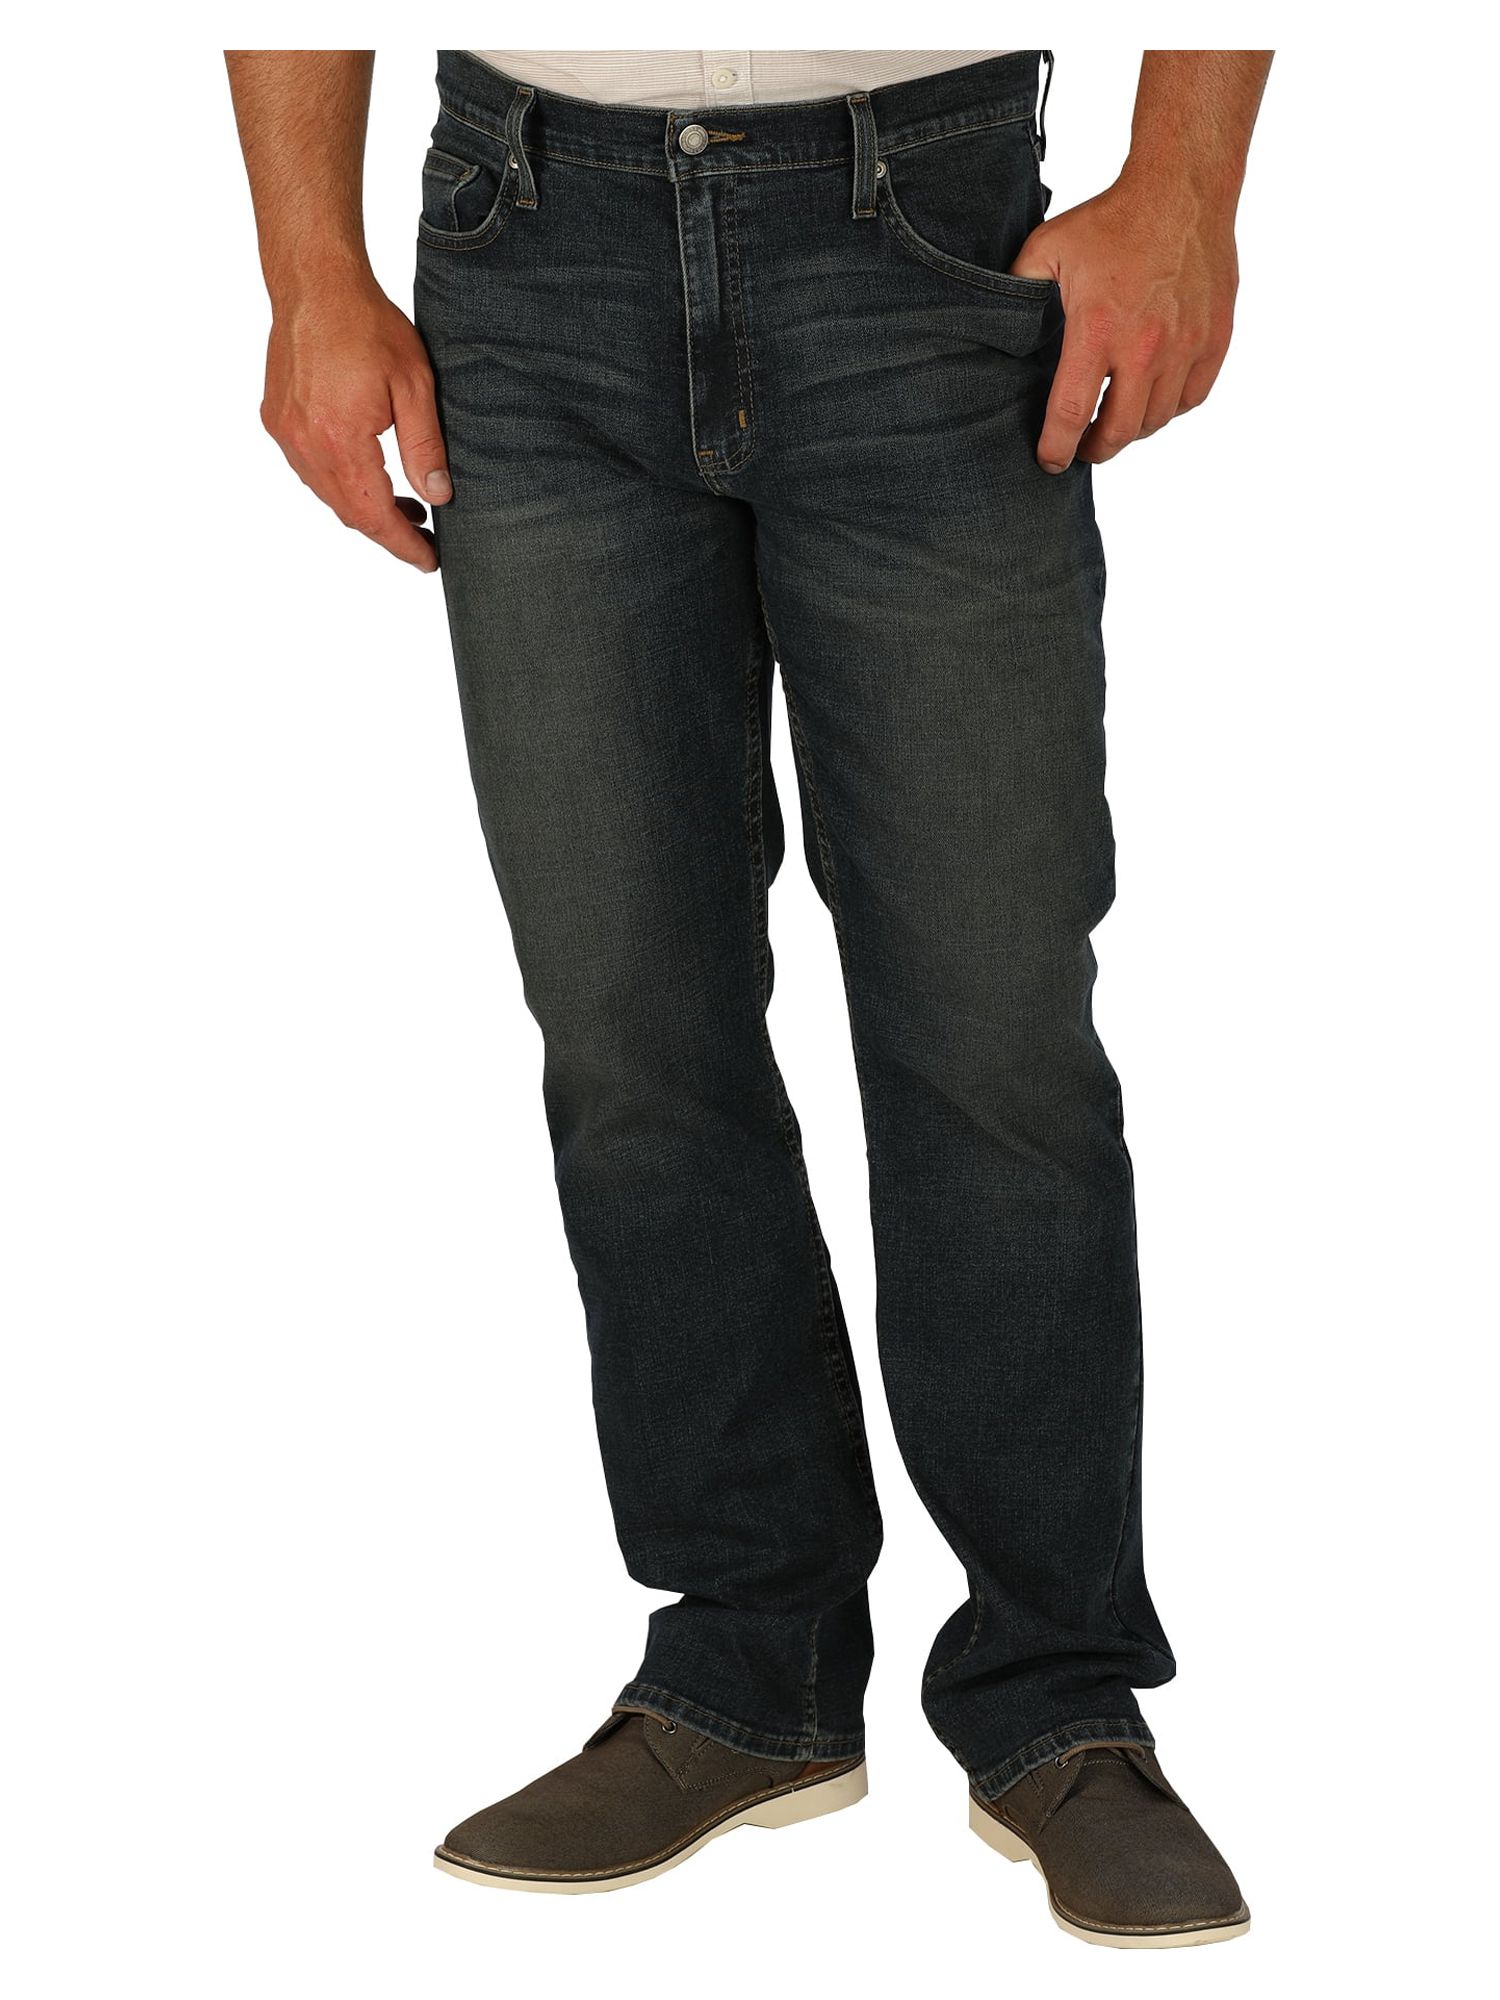 George Men's Bootcut Jeans - image 3 of 6